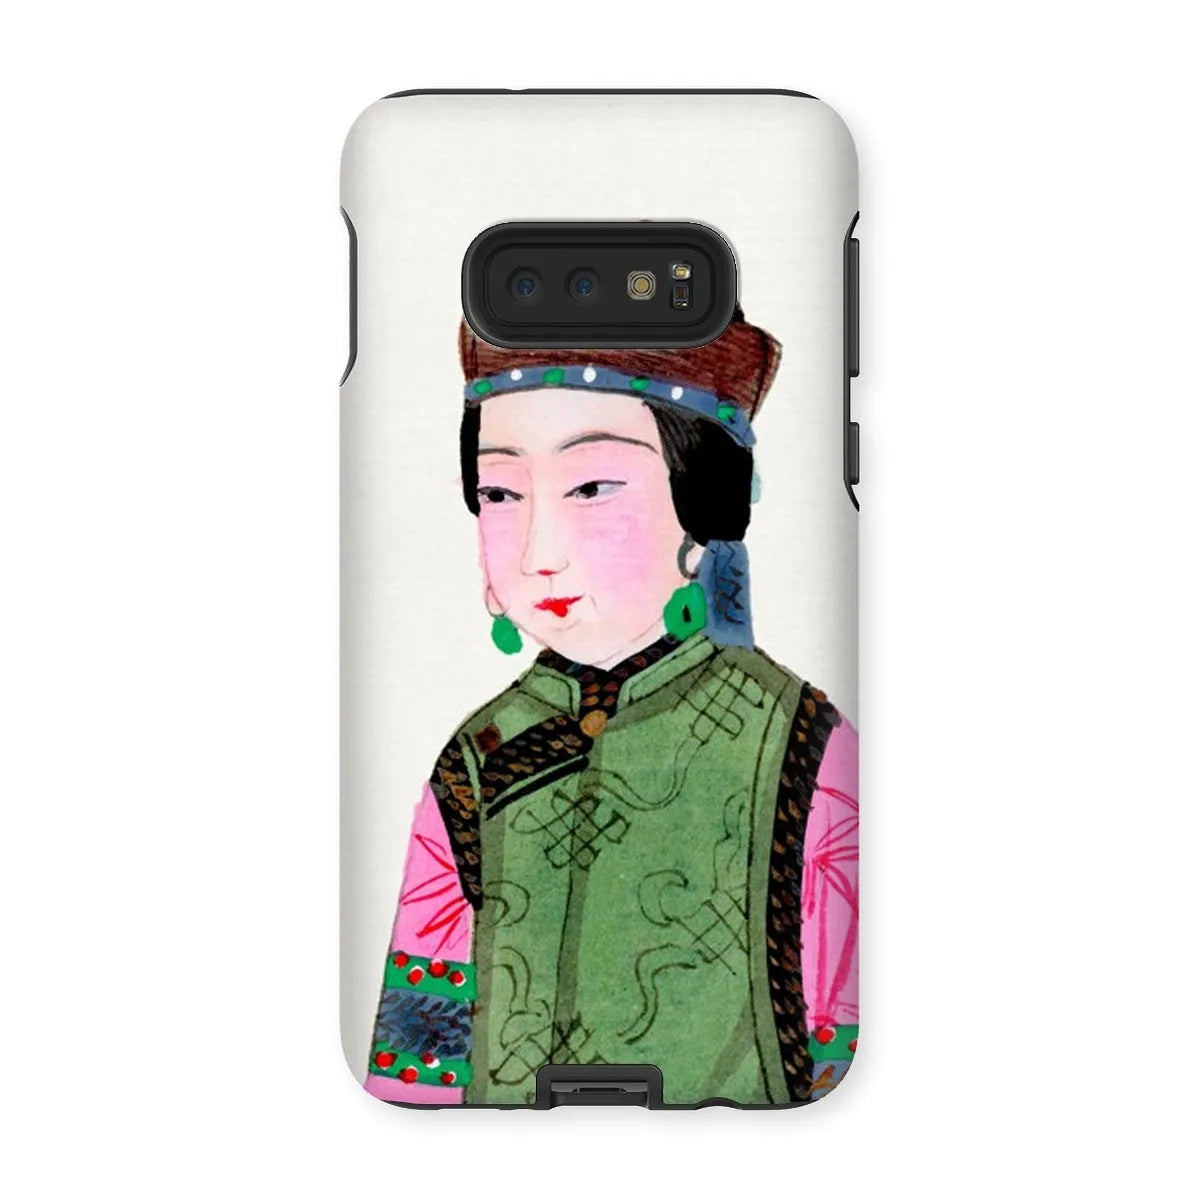 Noblewoman In Winter - Chinese Aesthetic Art Phone Case - Samsung Galaxy S10e / Matte - Mobile Phone Cases - Aesthetic